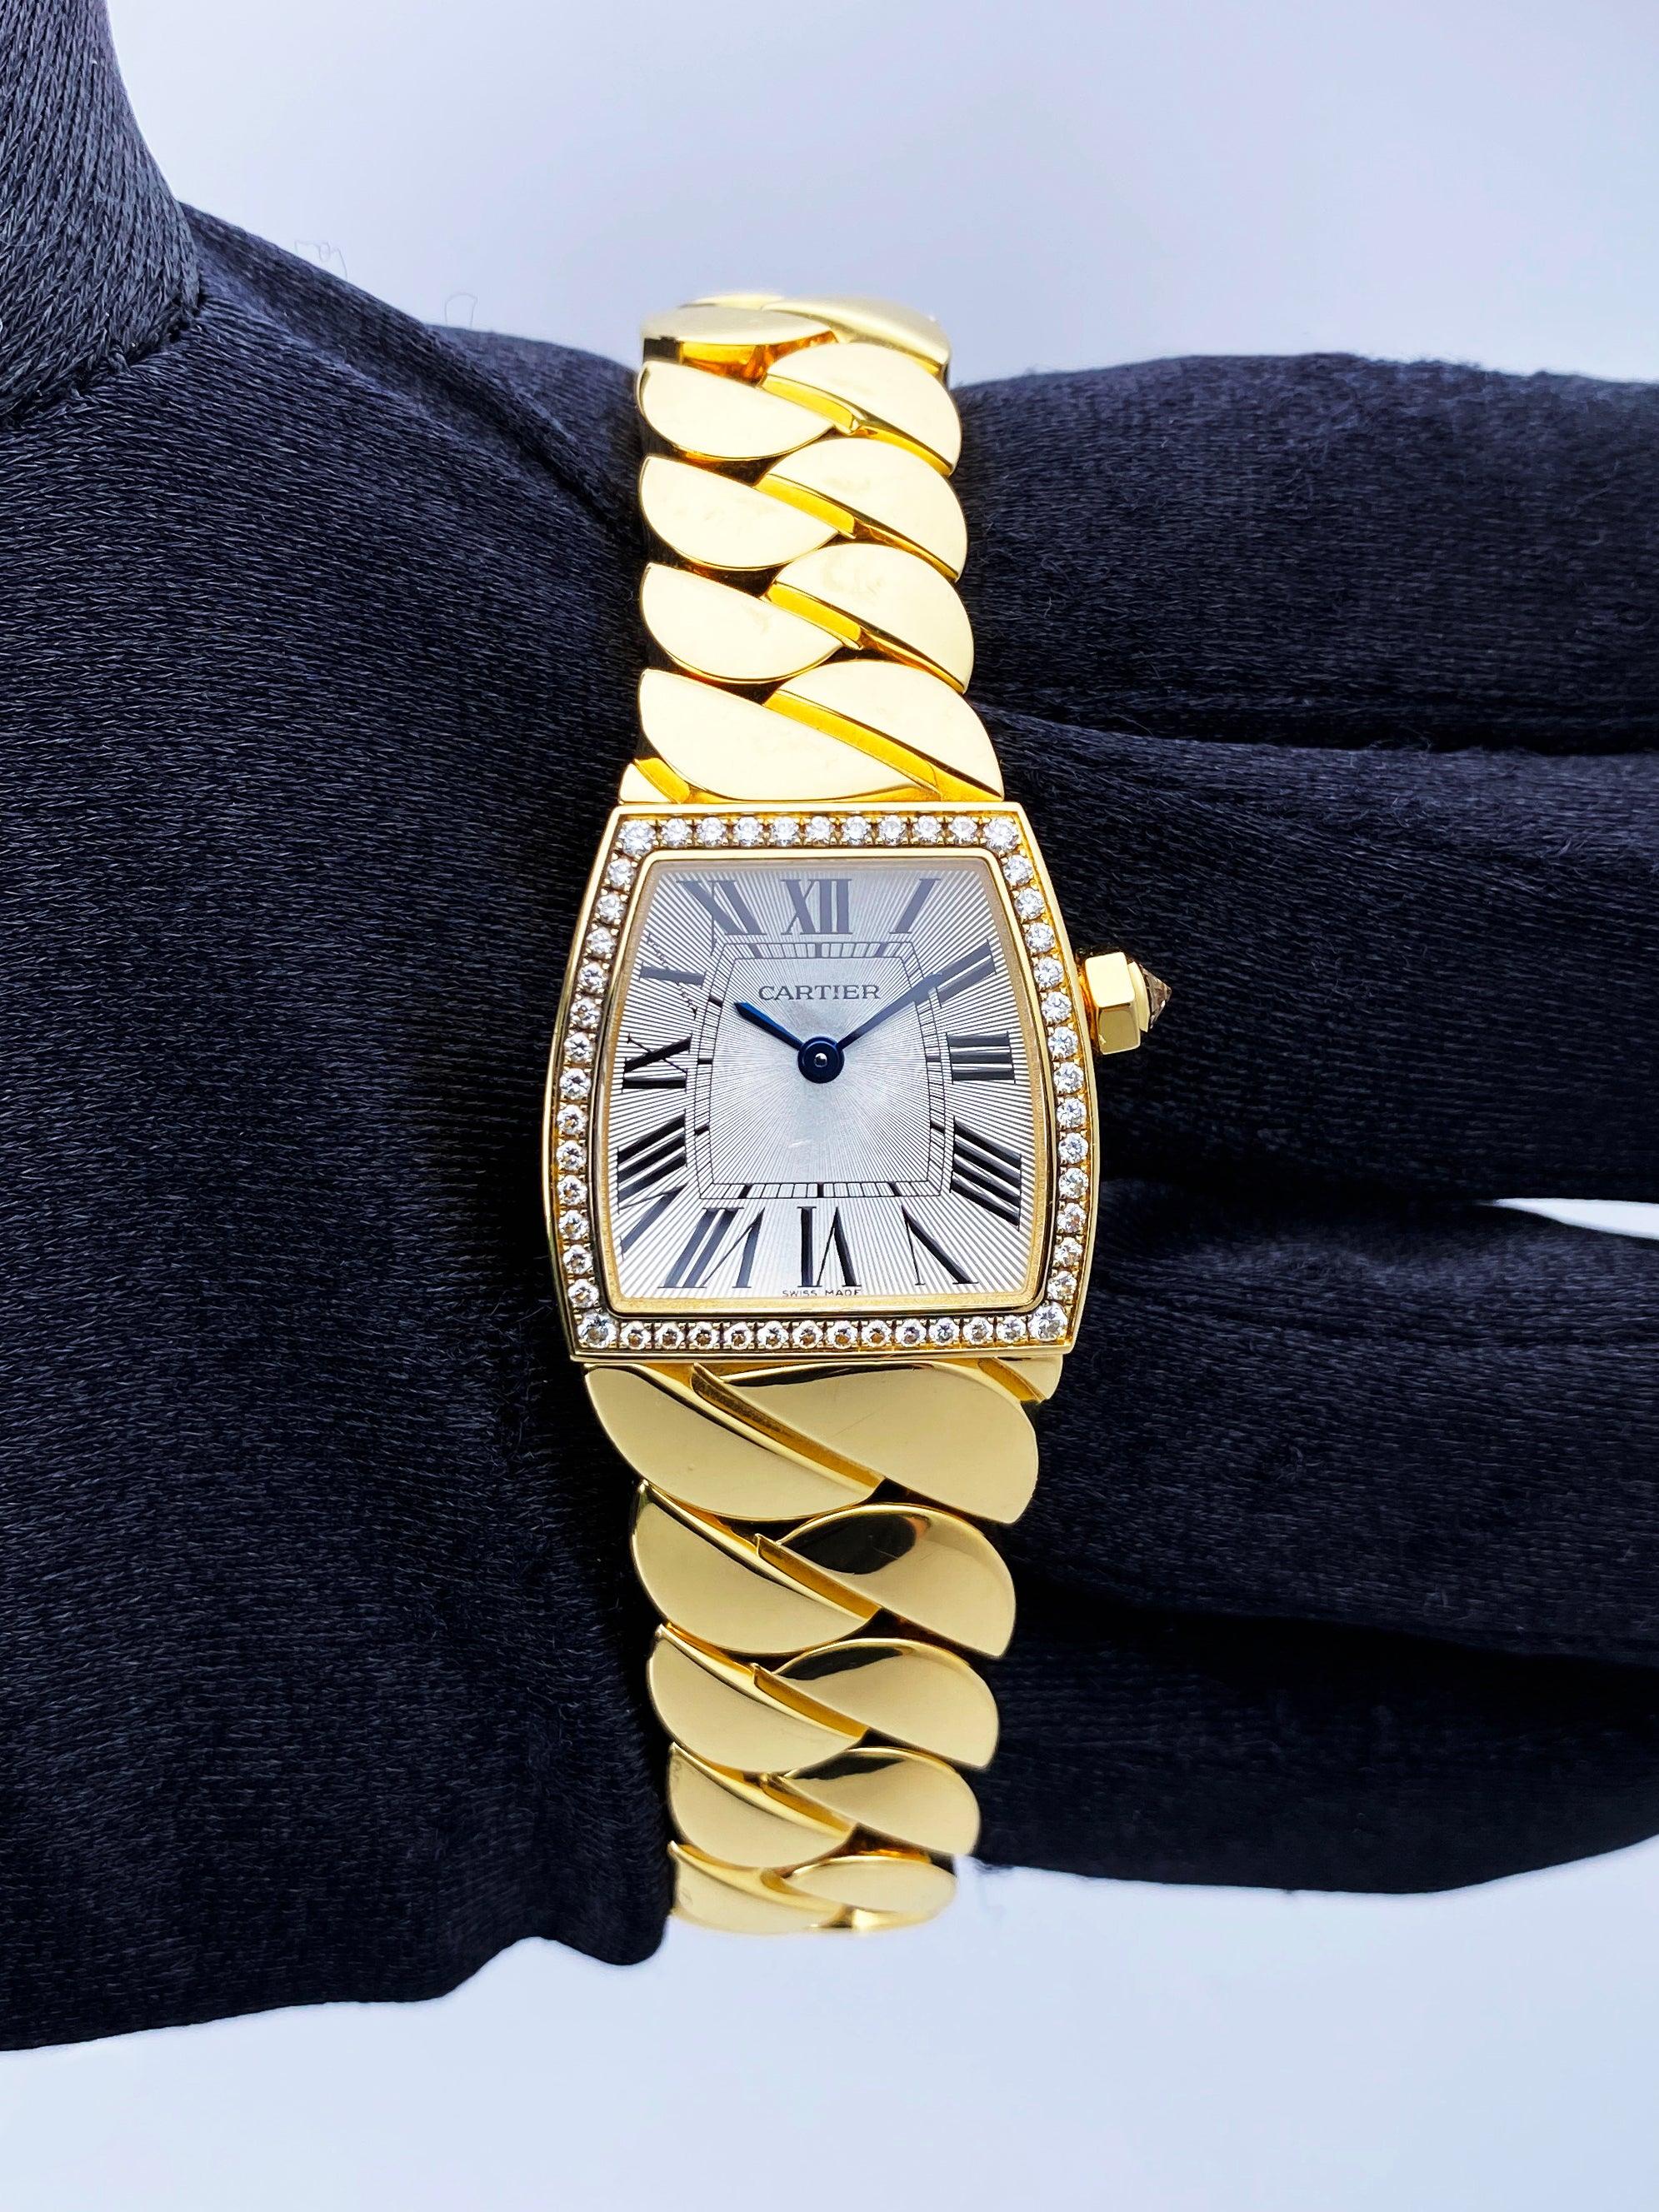 Cartier La Dona WE60040H Ladies Watch. 22mm 18K Yellow gold case with factory diamond set. Silver dial with blue hands and black Roman numeral hour marker. Minute markers on the inner dial. 18K yellow gold bracelet with a hidden butterfly clasp.